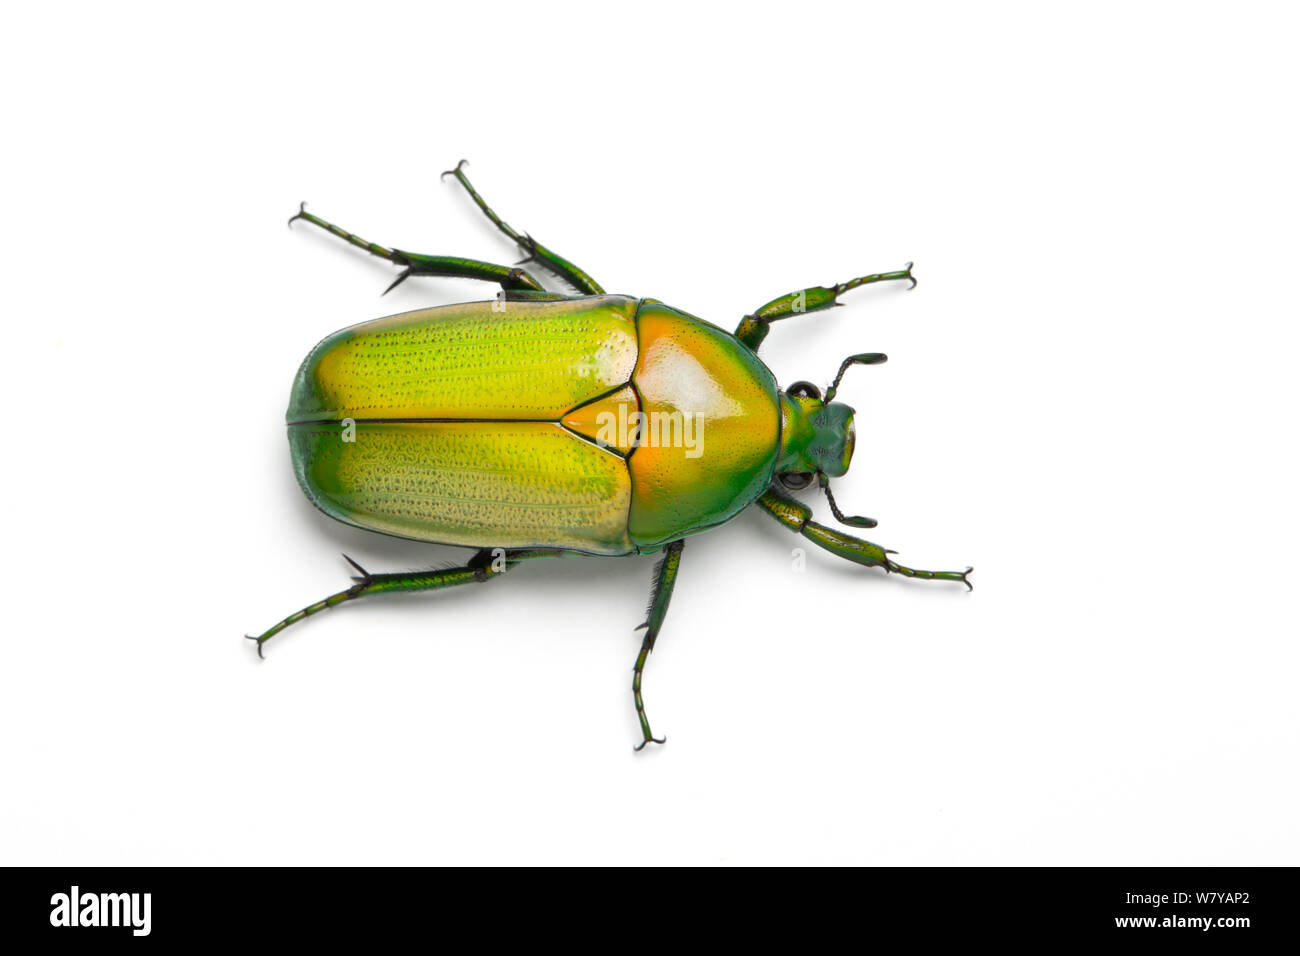 African jewel beetle / Fruit chafer (Chlorocala africana camerunica) Captive, occurs in Africa. Stock Photo